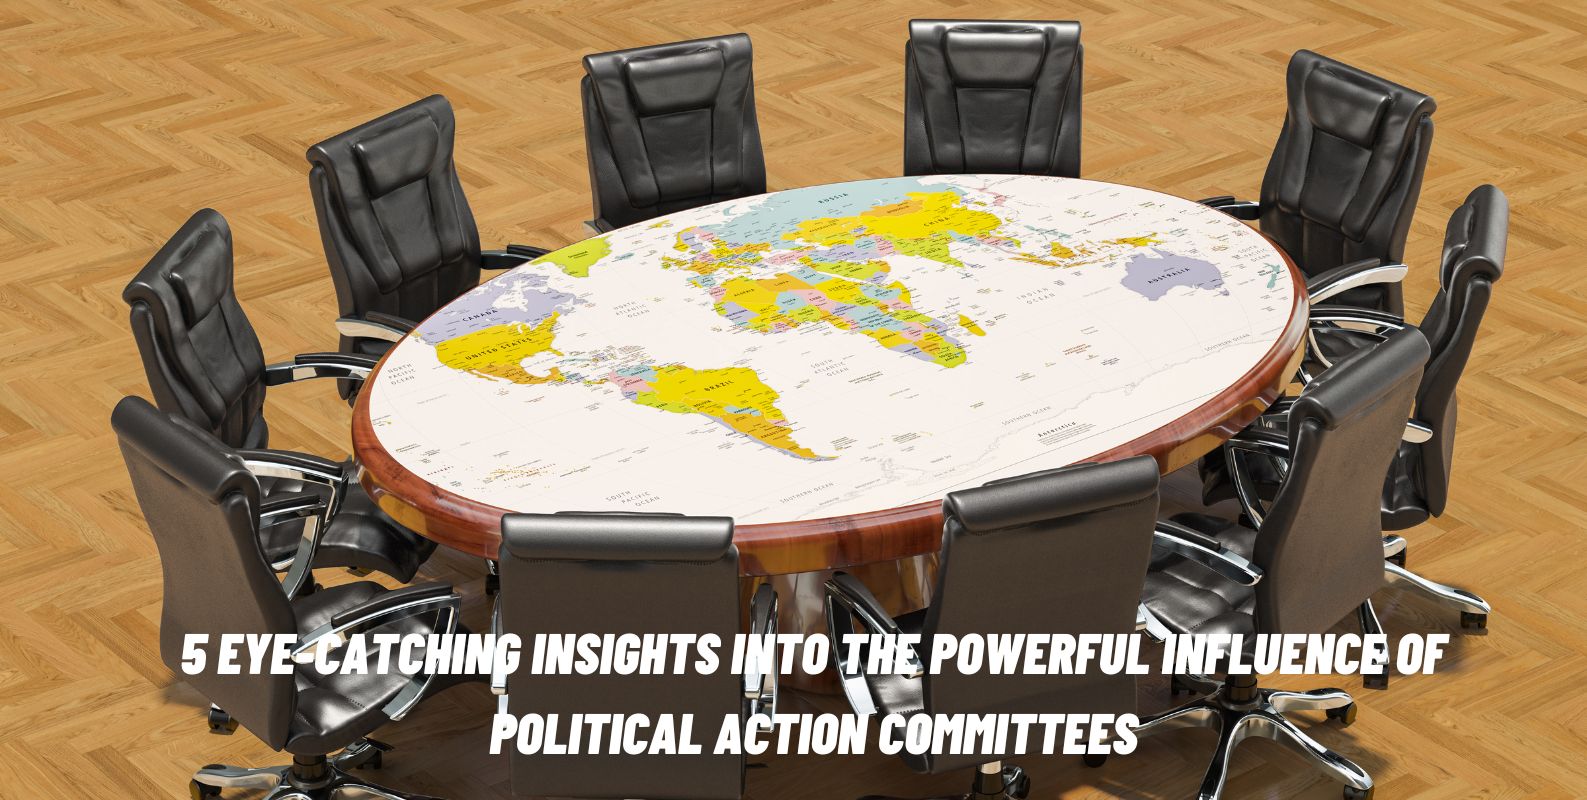 Political Action Committees Influence, Campaign Financing, Super PACs, Election Funding, Political Donations